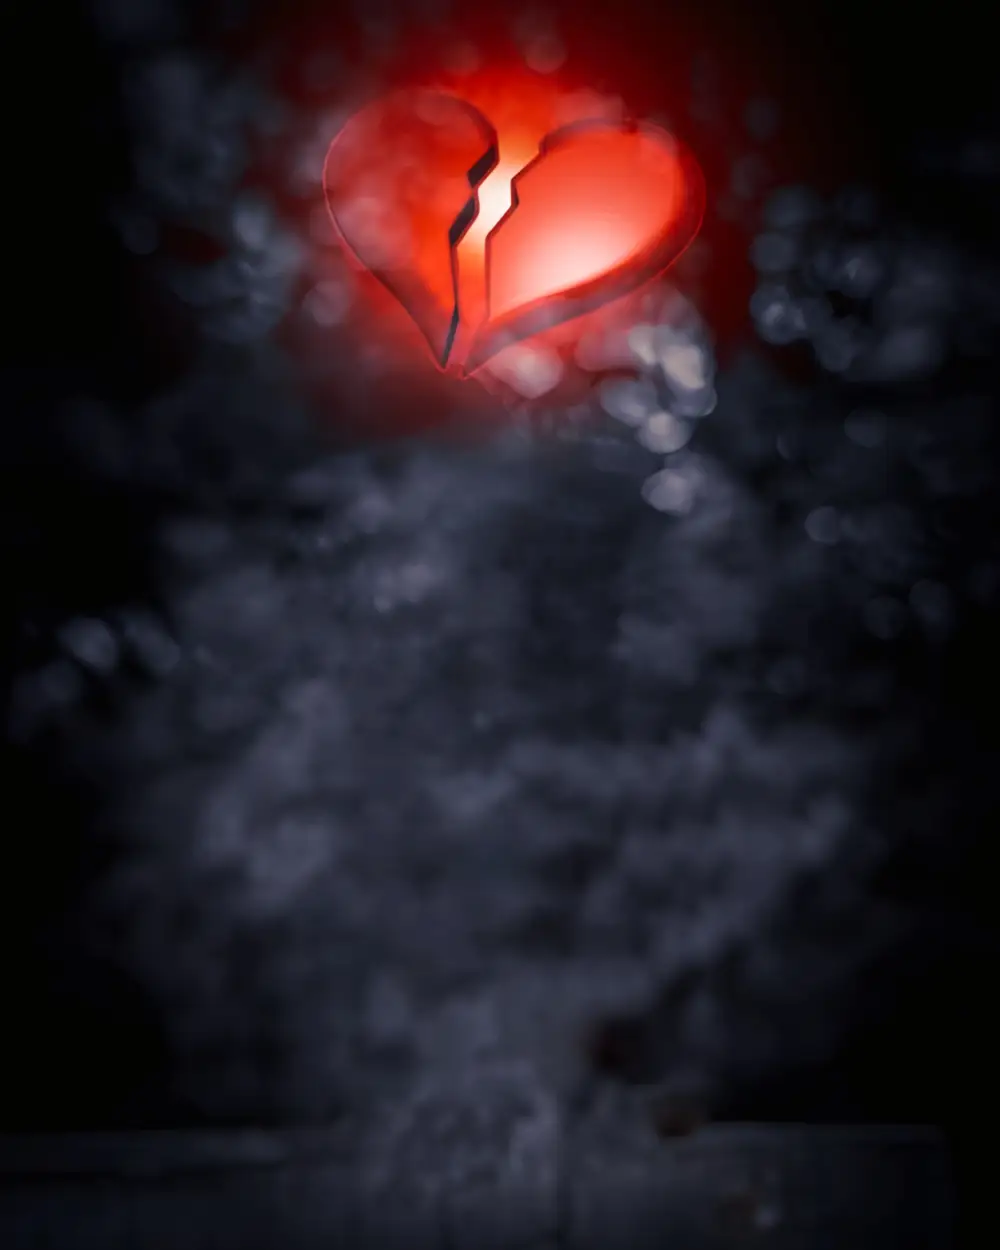 Broken Heart Hd Background For Editing Download 2023 Free!!